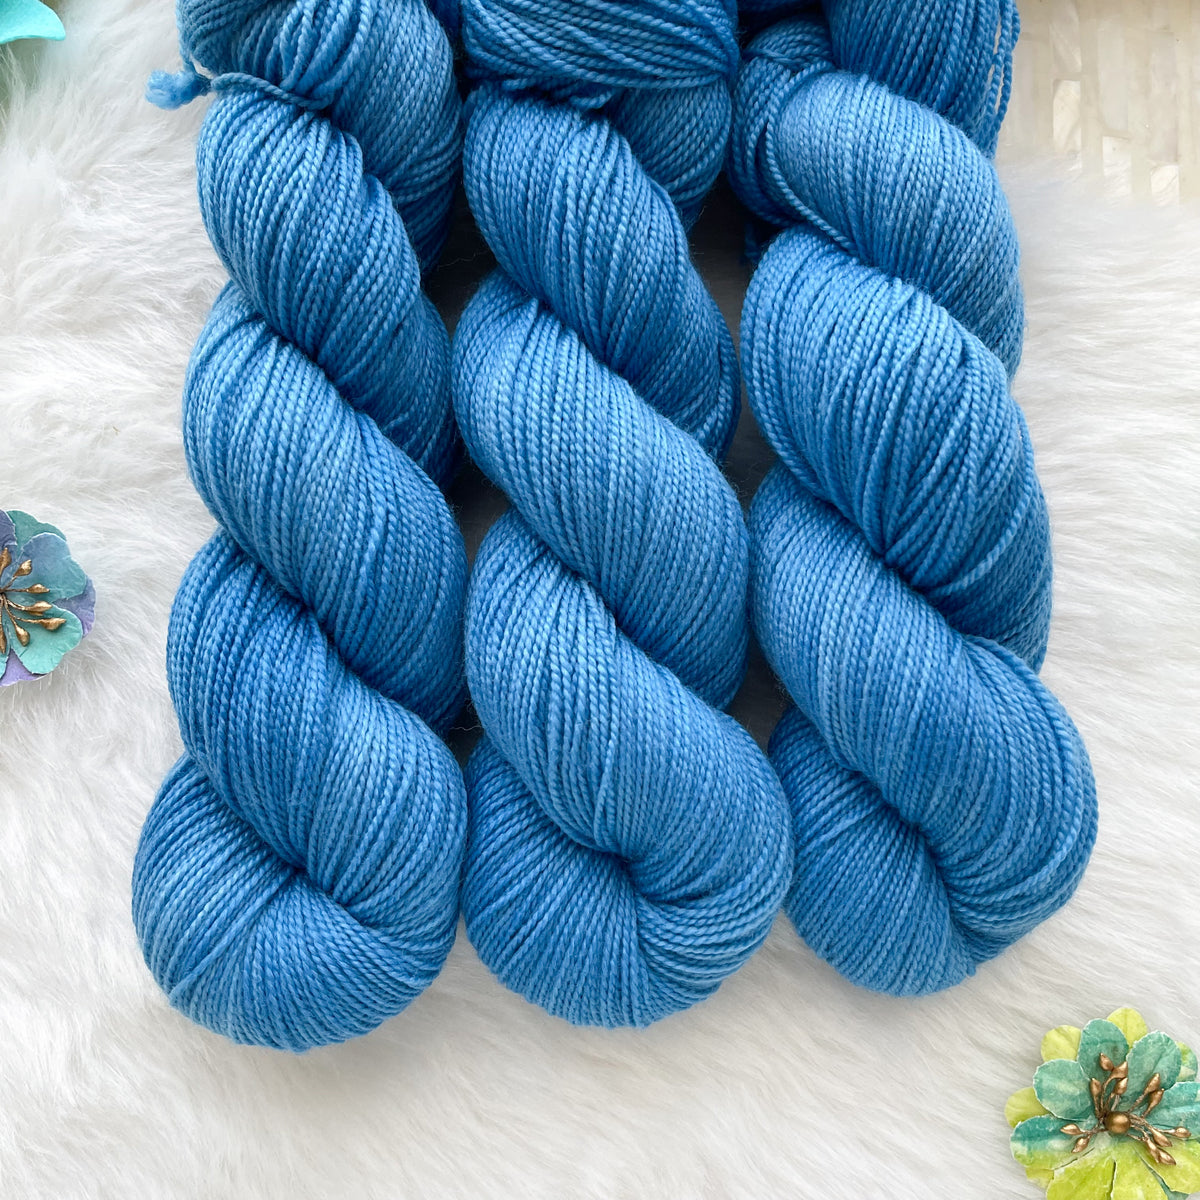 ANTARCTICA - Dyed to Order - Hand Dyed Yarn Skein